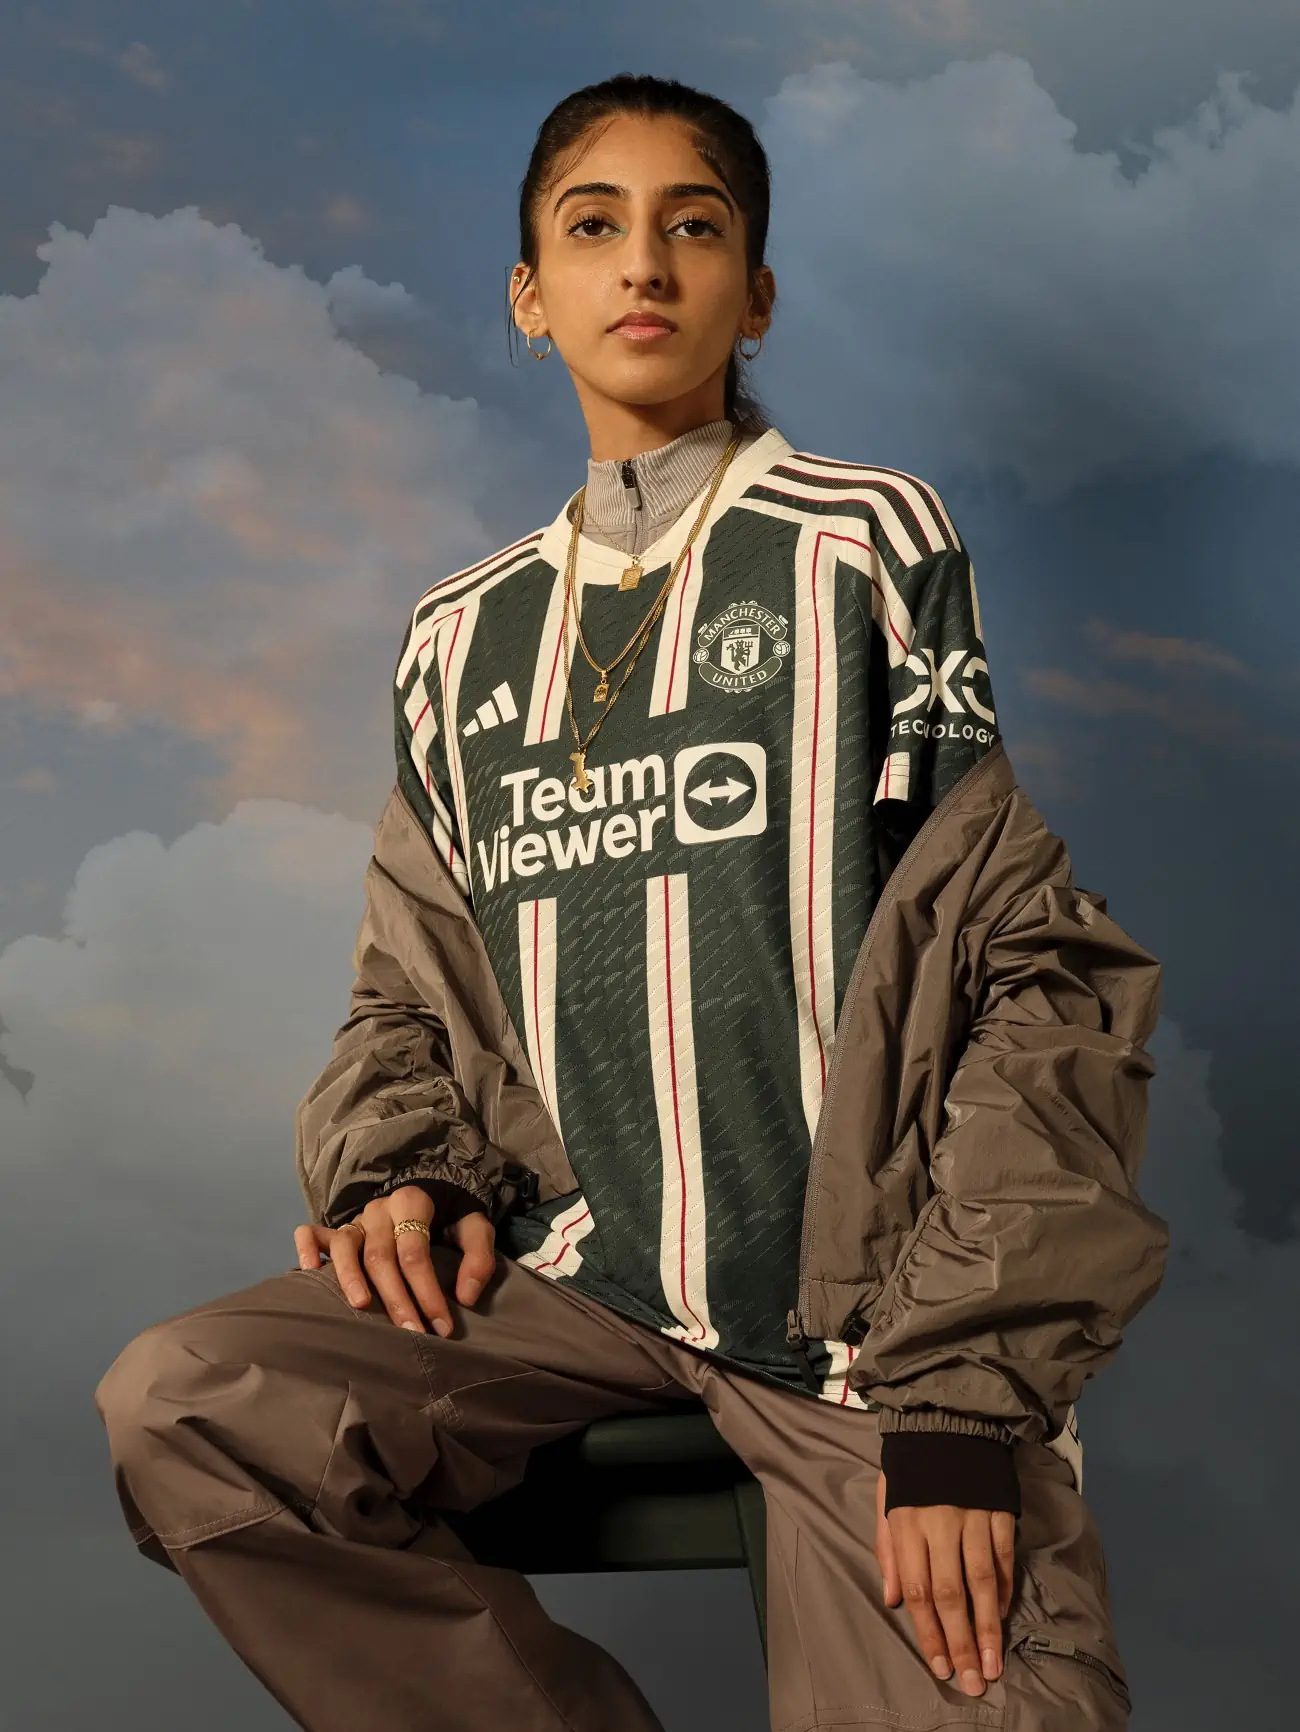 adidas x Manchester United launch the away jersey for the 2023-24 season